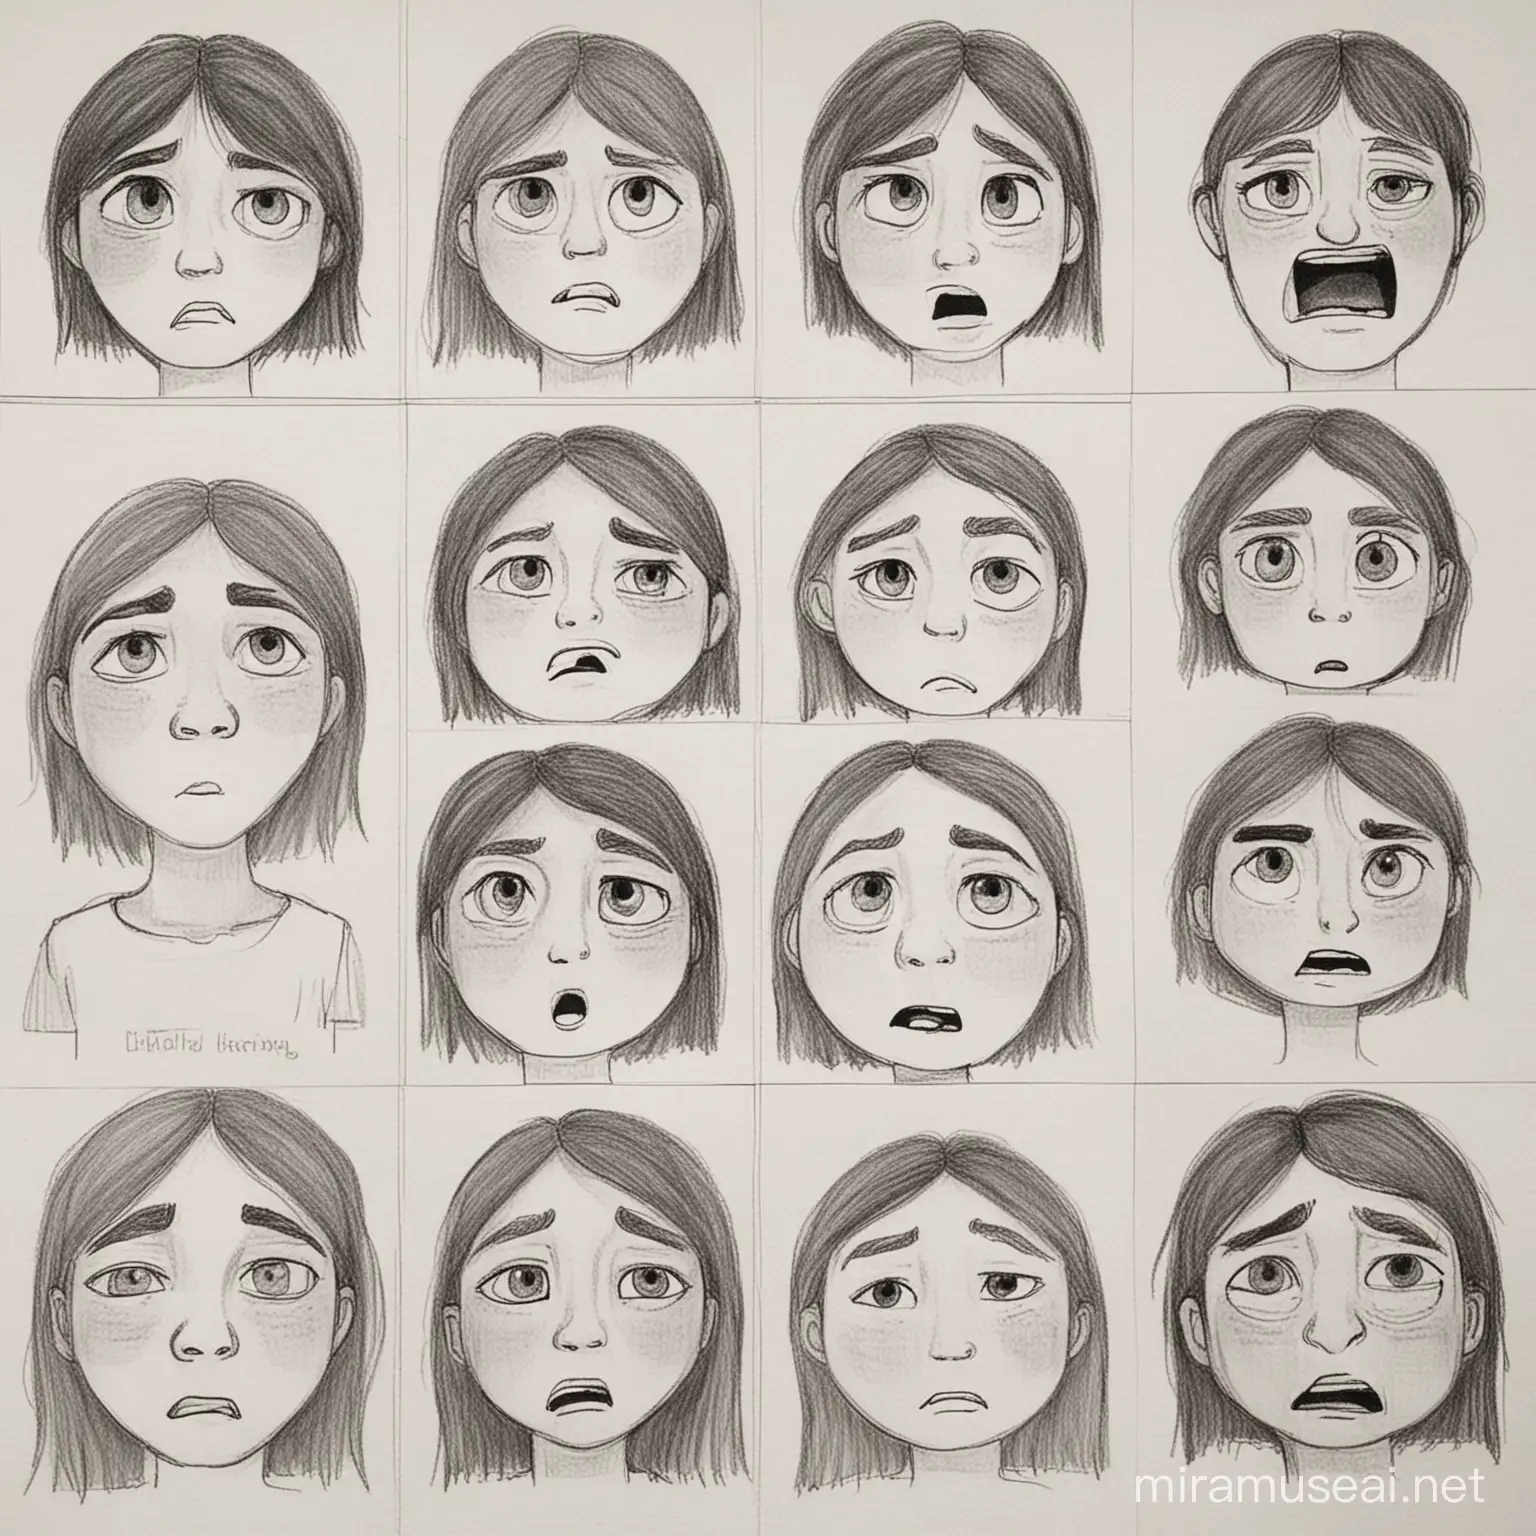 Create illustrations that represent different emotions discussed in the book, such as sadness, anger, hope, and resilience. These illustrations could be simple line drawings or more detailed artwork.

